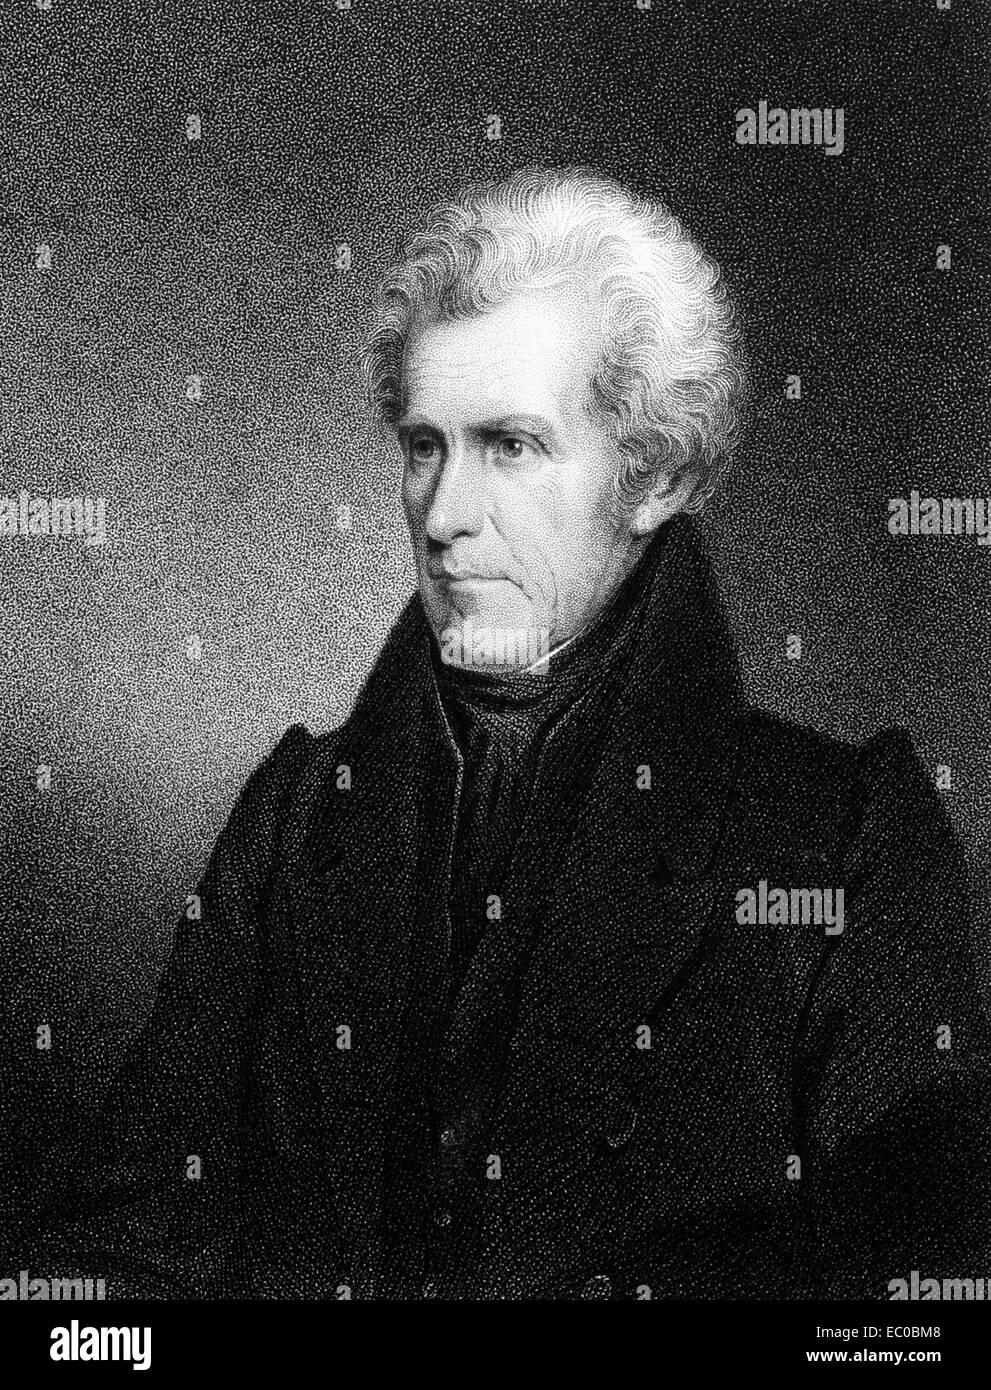 Andrew Jackson (1767-1845) on engraving from 1834. 7th President of the United States during 1829–1837. Stock Photo